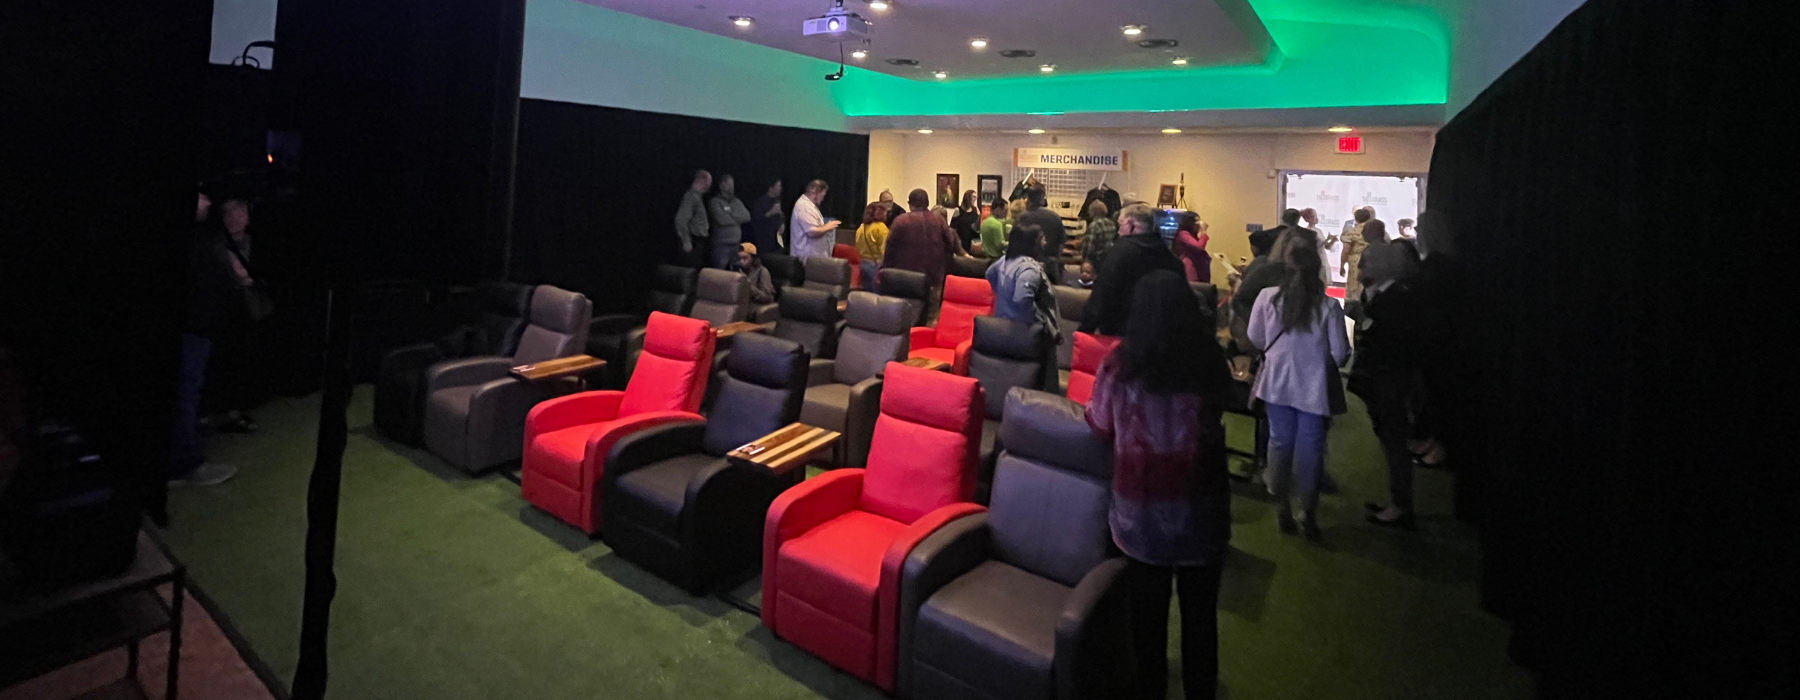 Red, gray and black chairs on green carpet facing a screen, people mingling in the back, green lights light up the ceiling.